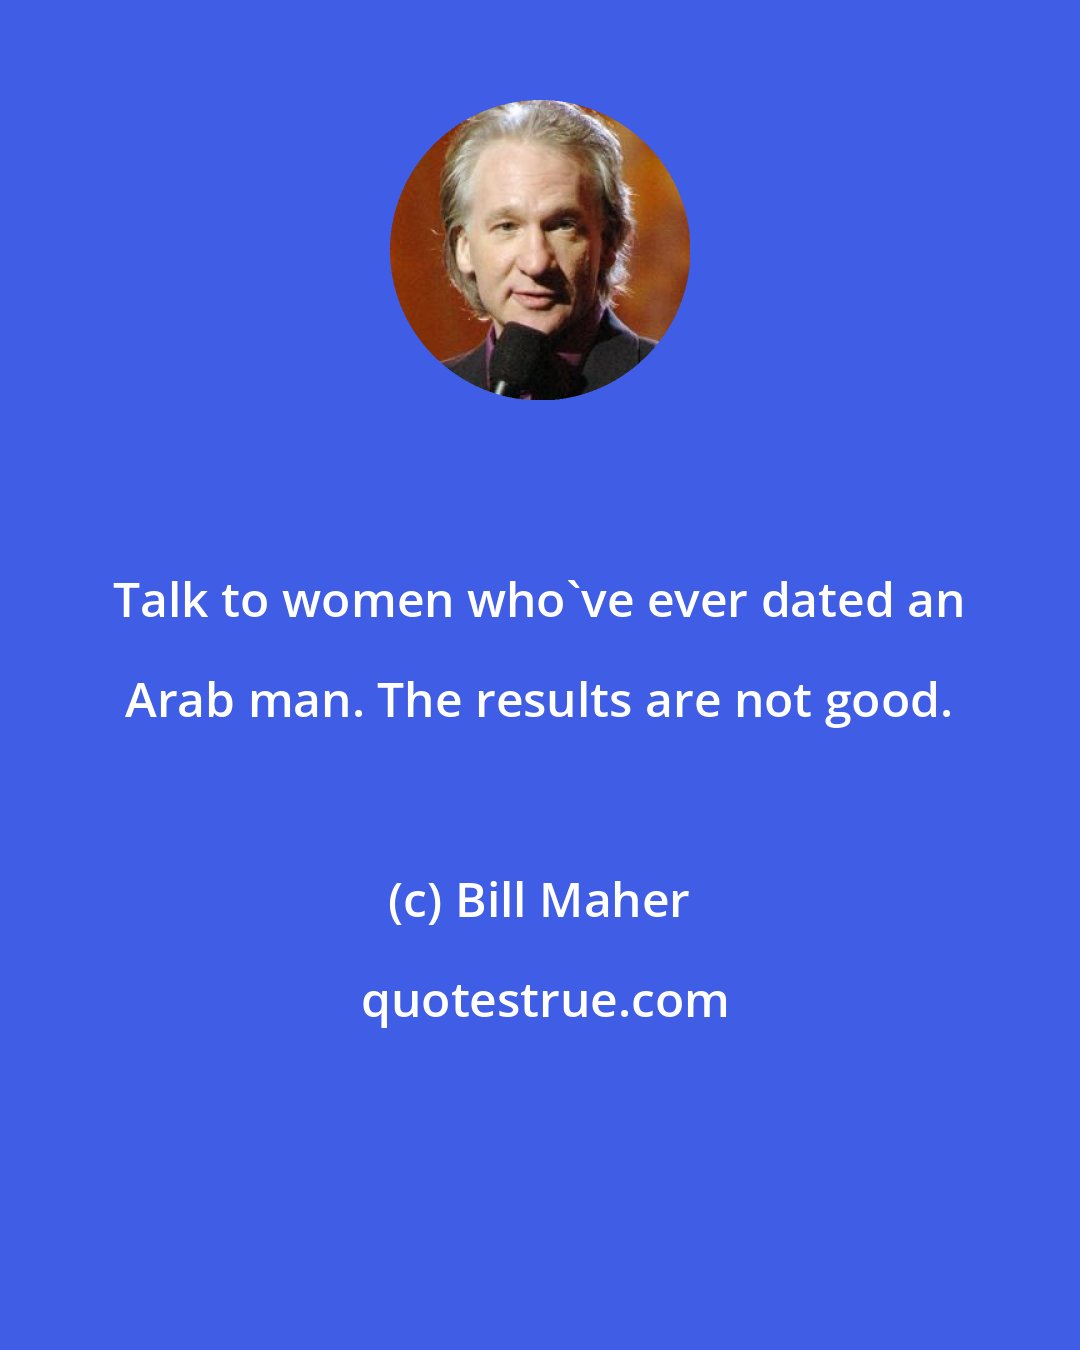 Bill Maher: Talk to women who've ever dated an Arab man. The results are not good.